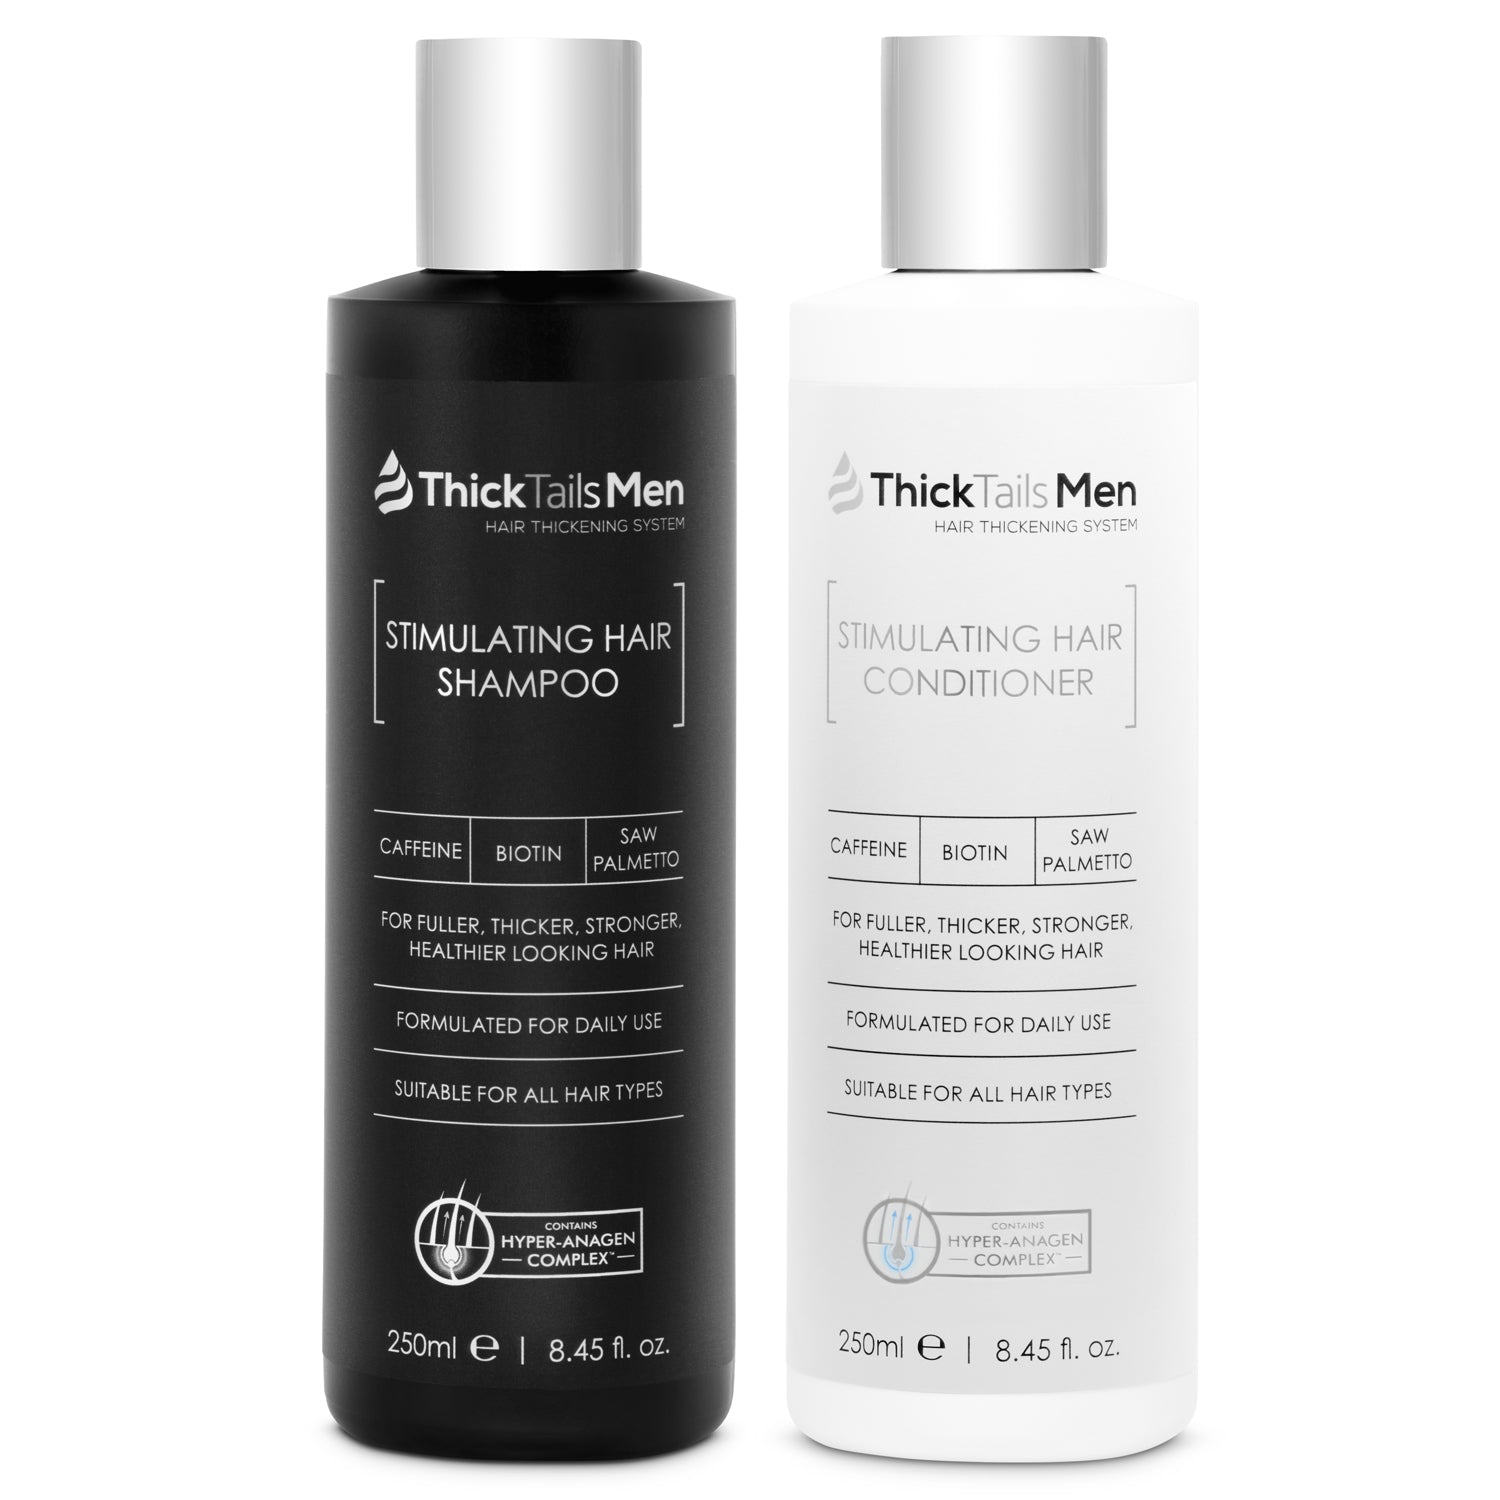 ThickTails Men's Stimulating Hair Growth Shampoo & Conditioner Dual Pack